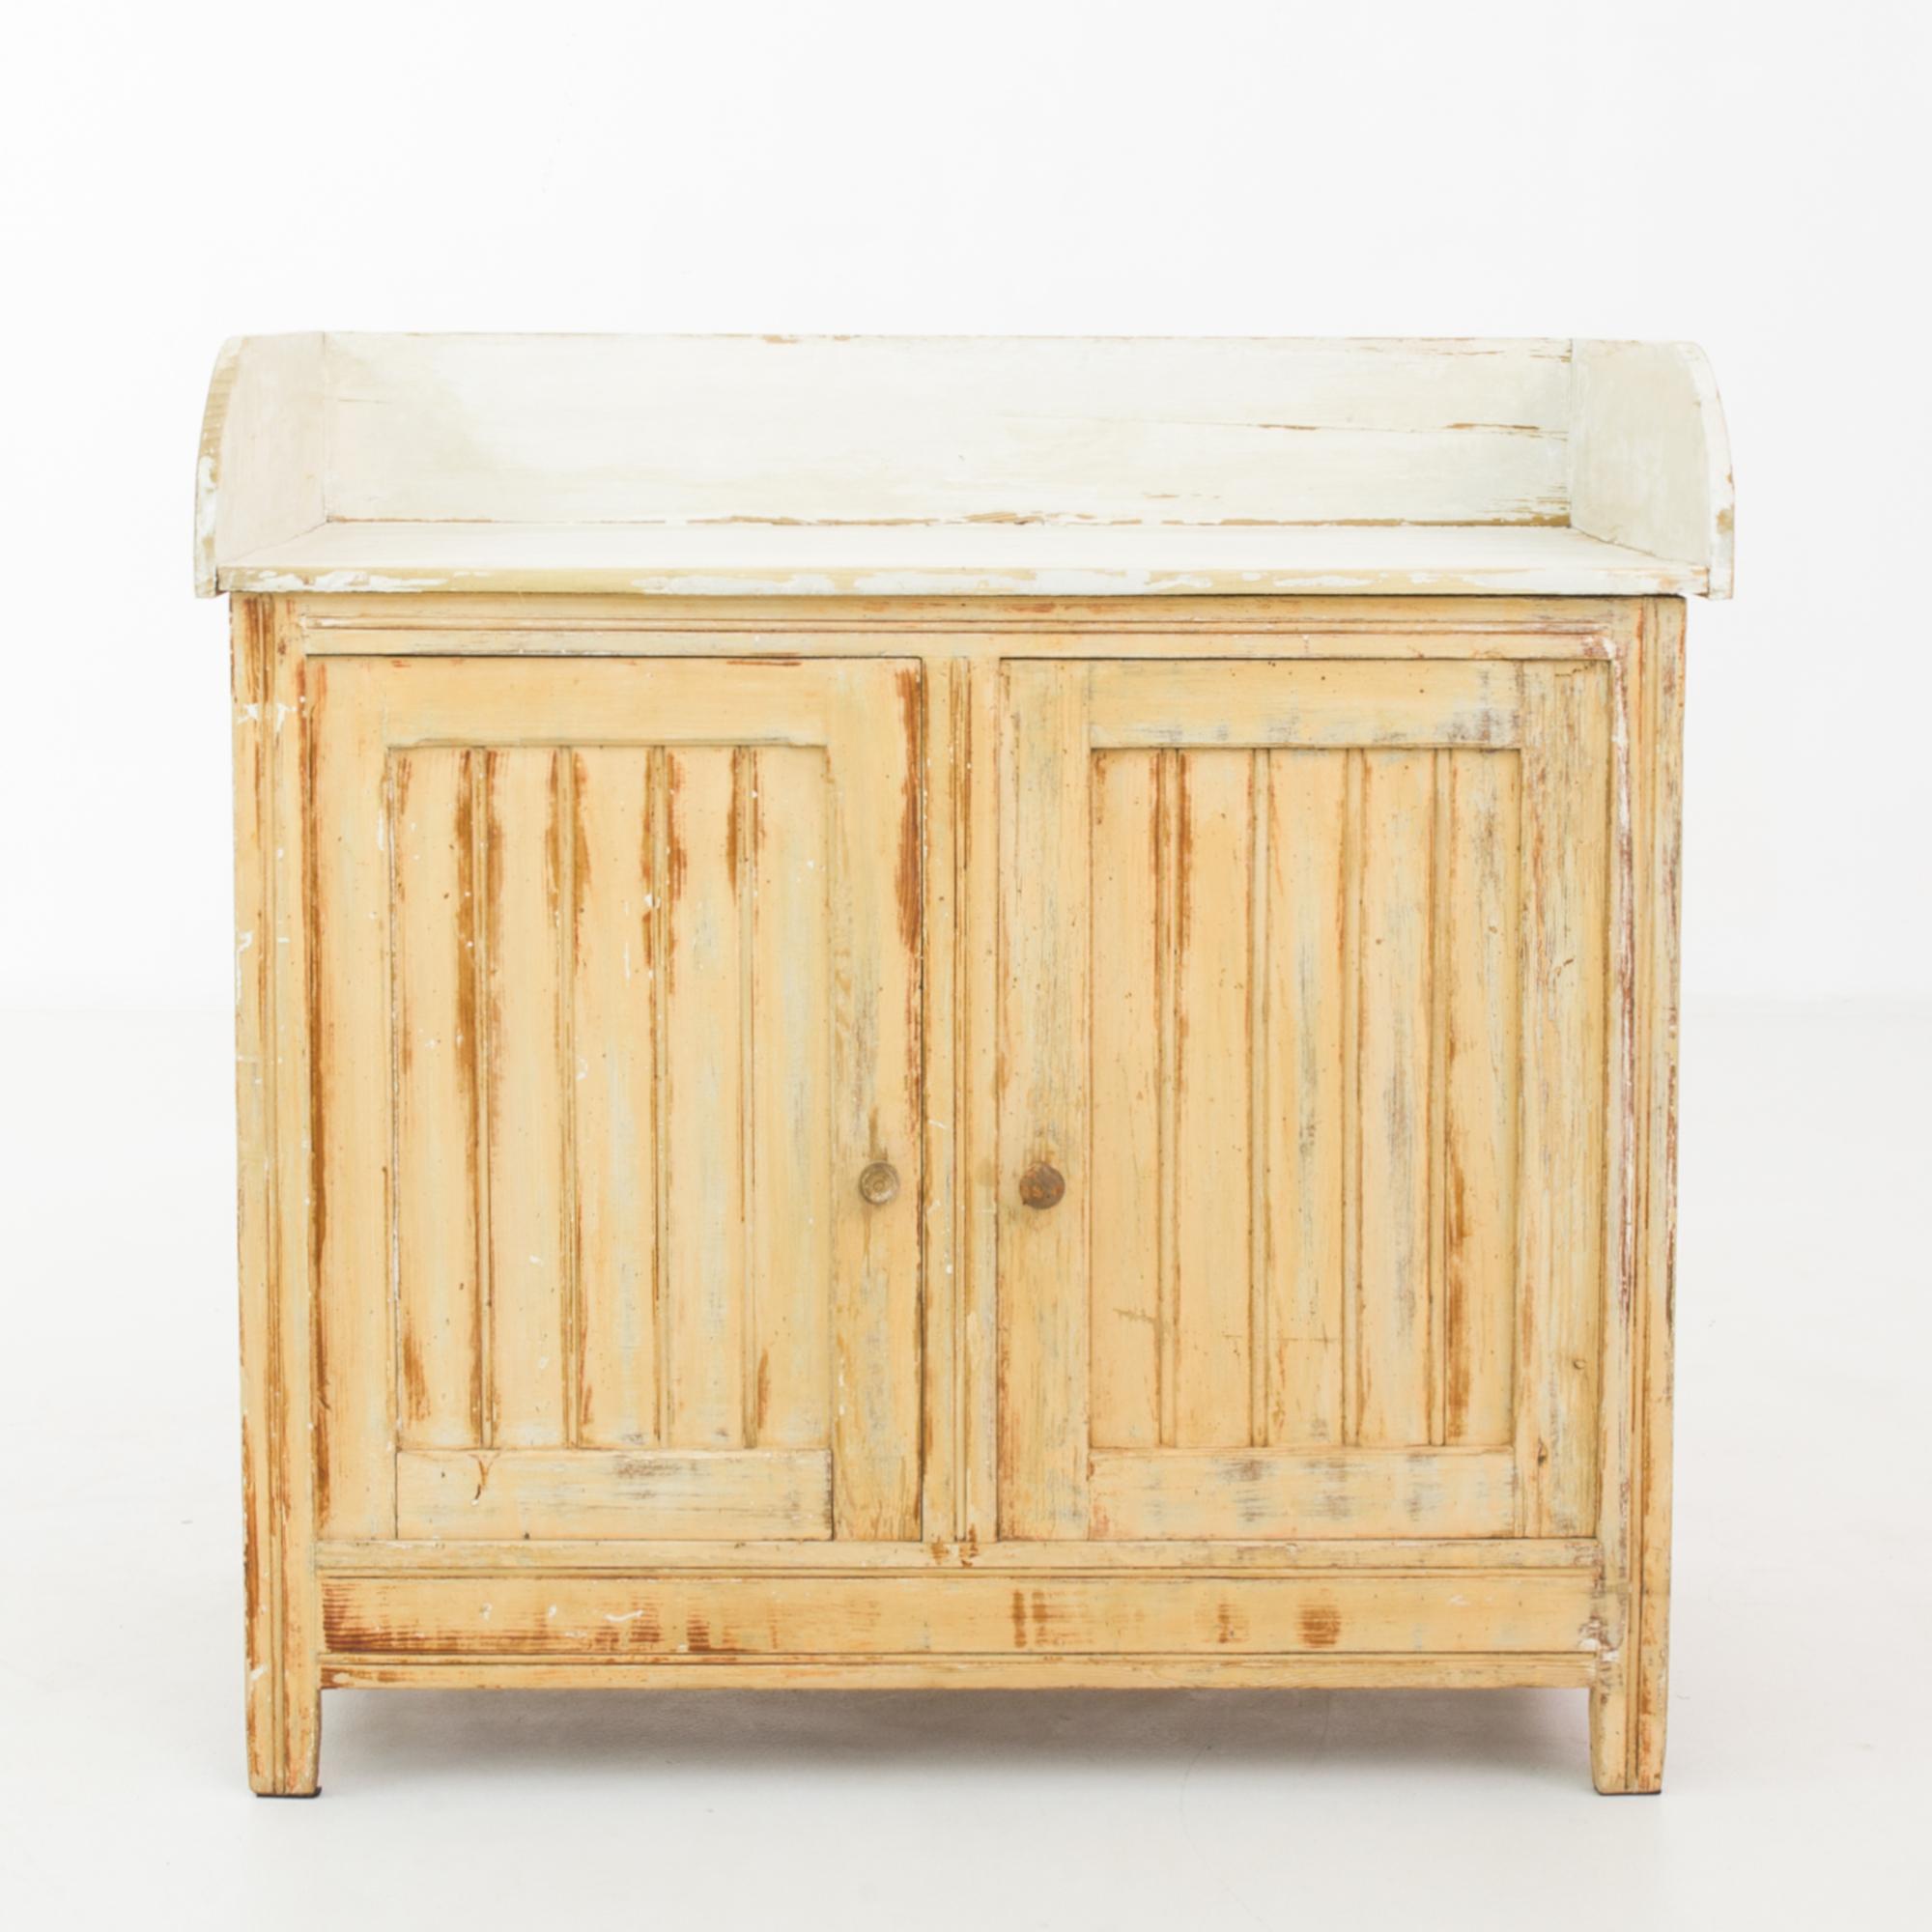 A patinated wooden cabinet from France, made circa 1900. Originally holding a freestanding wash basin, this classic bodied buffet chest of treated wood features a double door cabinet with two shelves, and a white painted wooden surround. Subtle